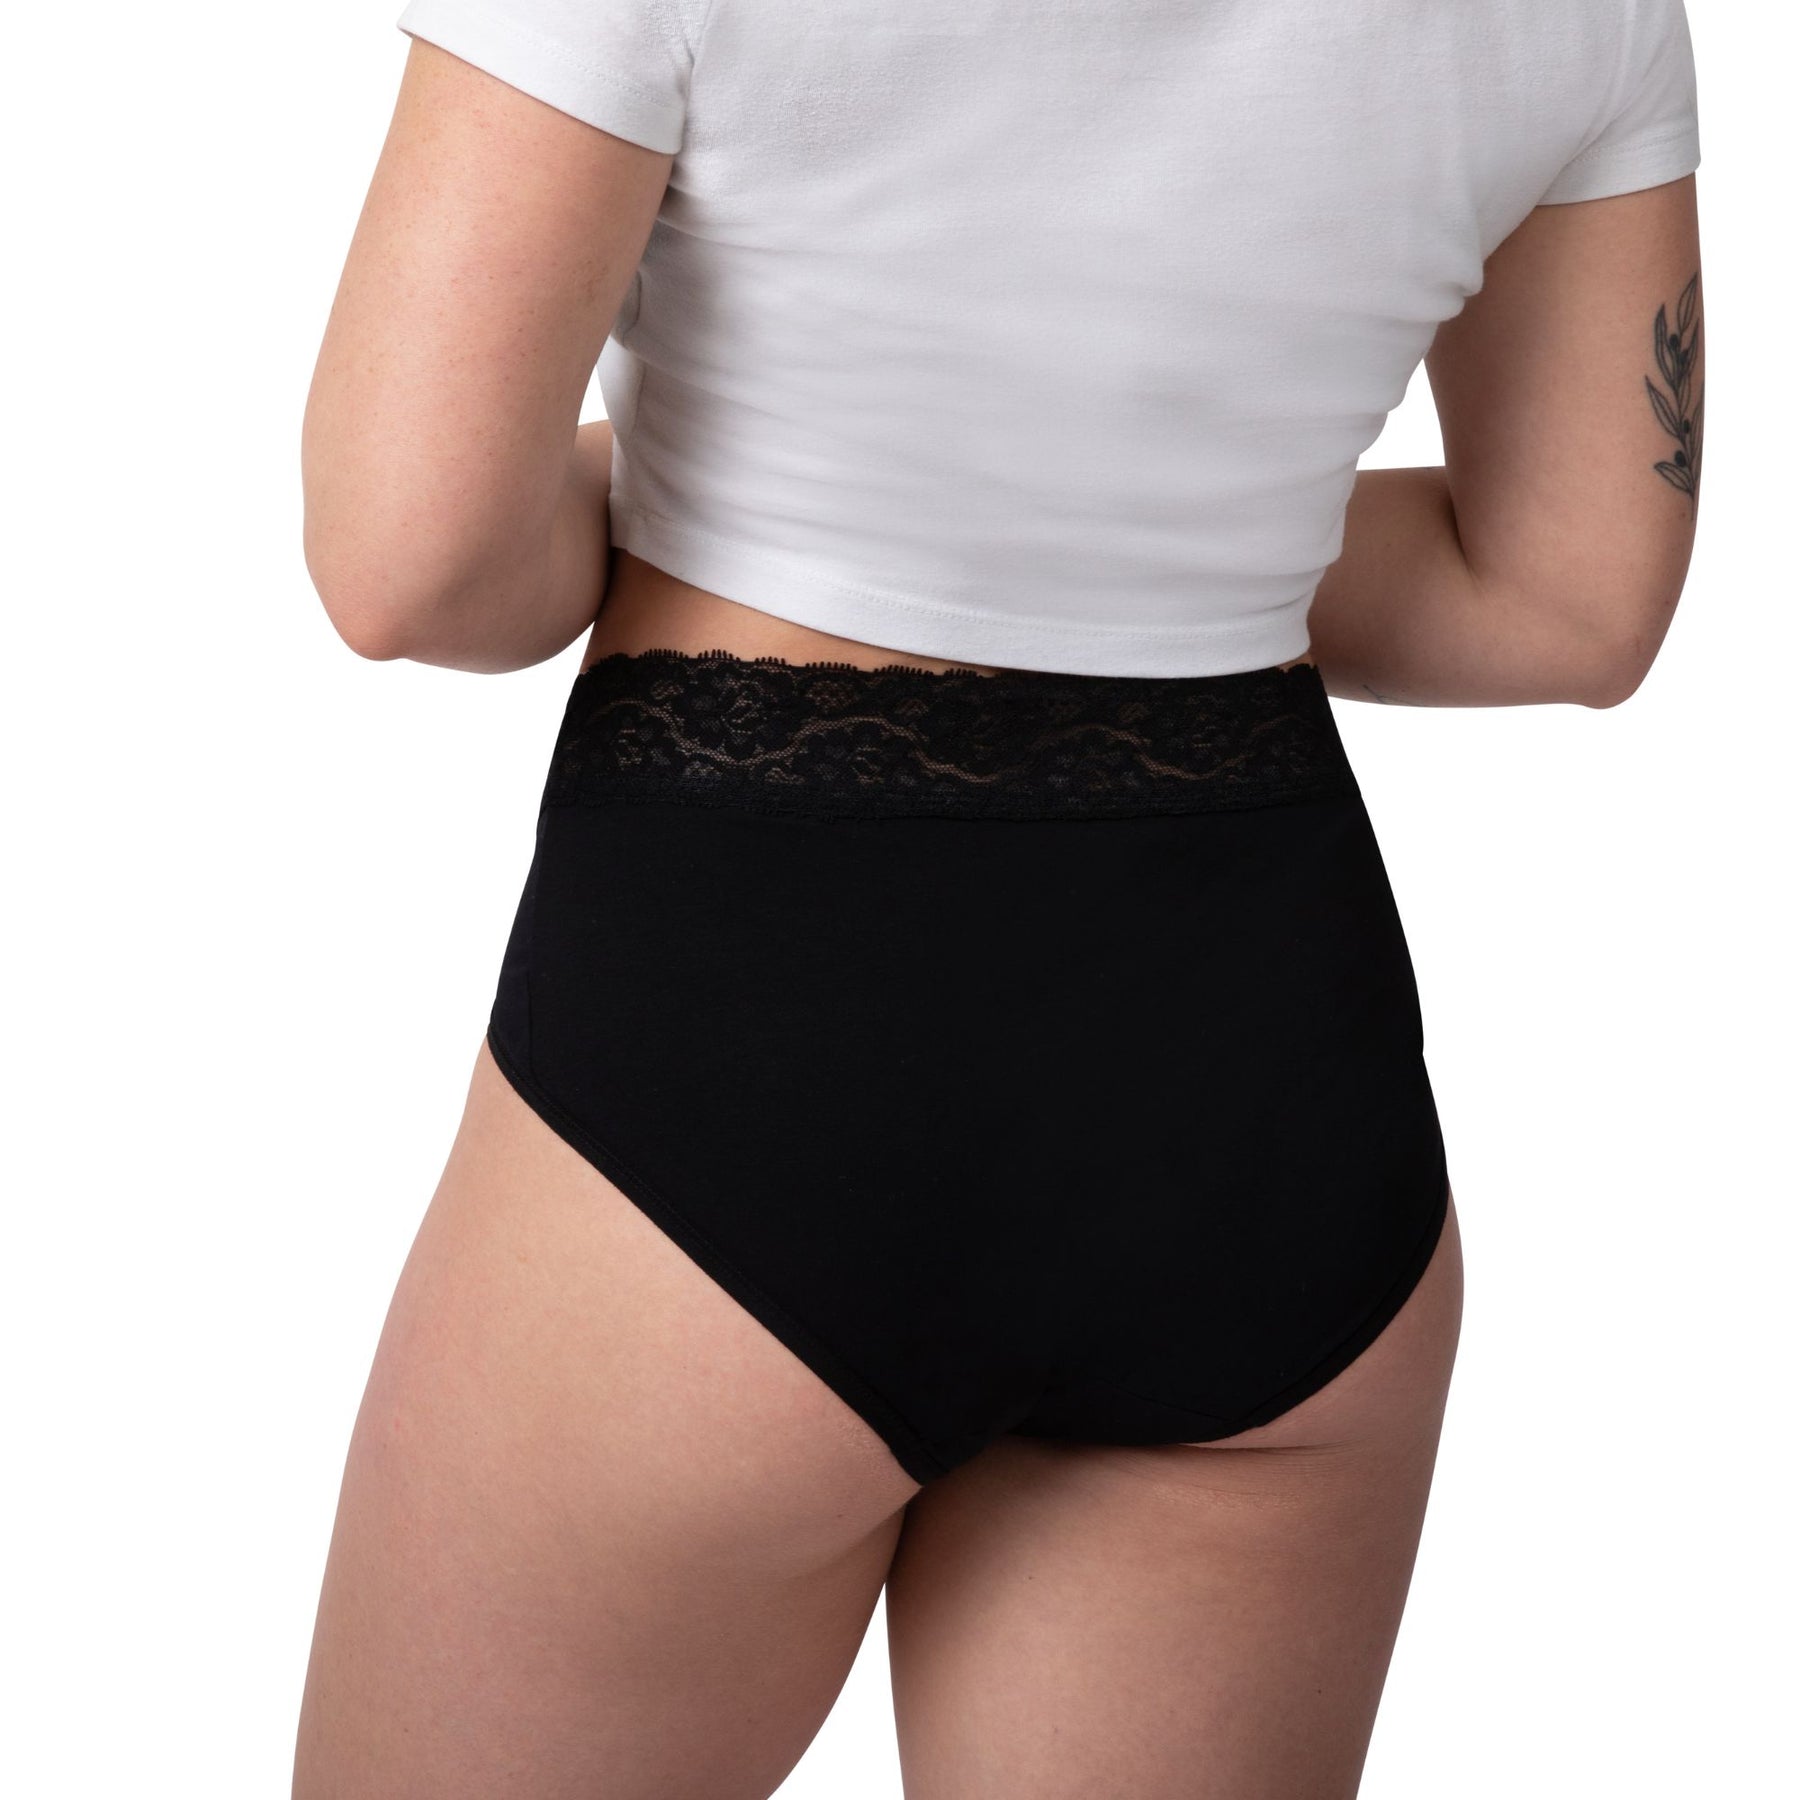 Women's Lace Waist Thong 3-pack made with Organic Cotton